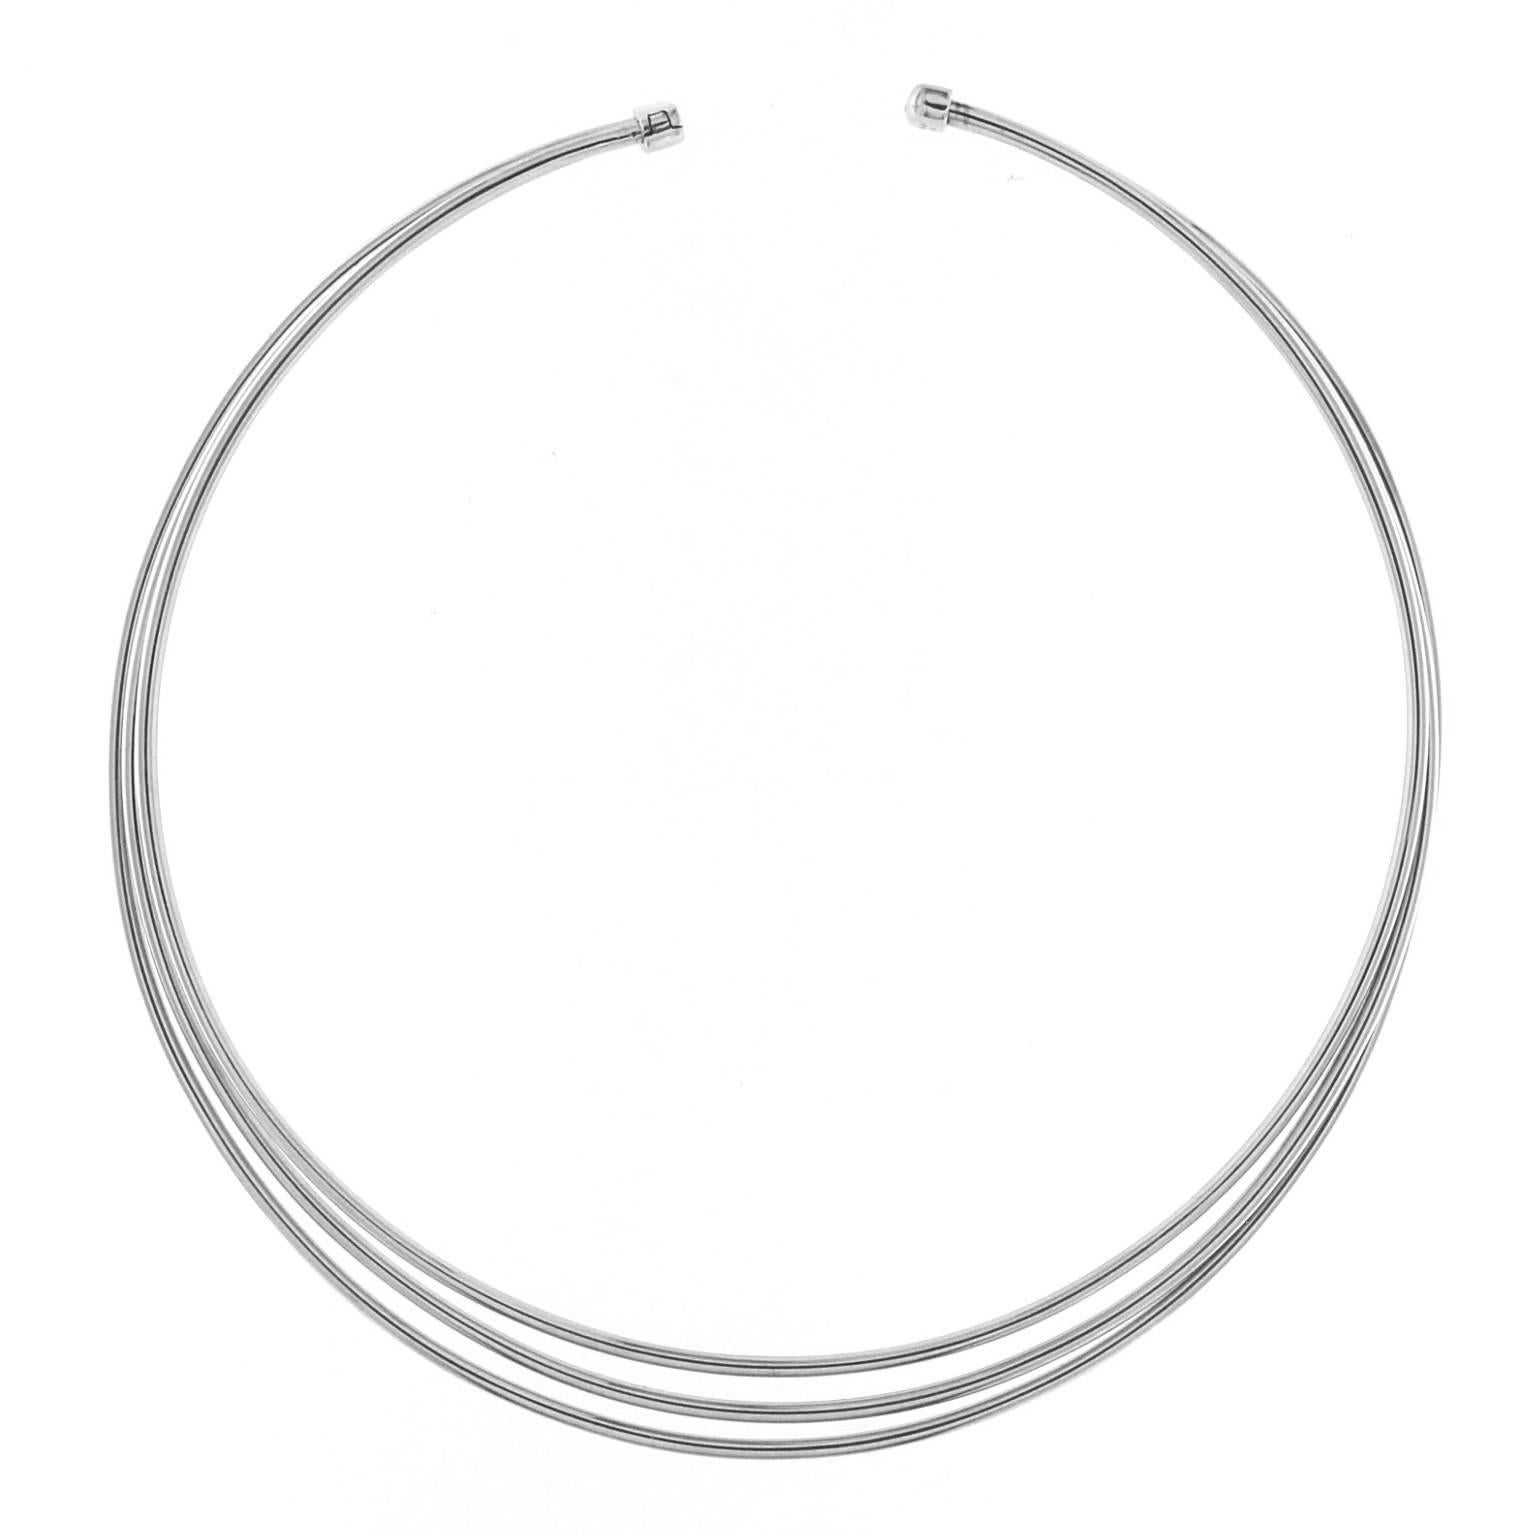 Chocker flexible very thin to which you can hang any pendant, essential line, its incredible flexibility allows it to be worn twisting by the only opening of the closure on the back
The total weight of the gold is GR 25,10

Stamp 10 MI 750

